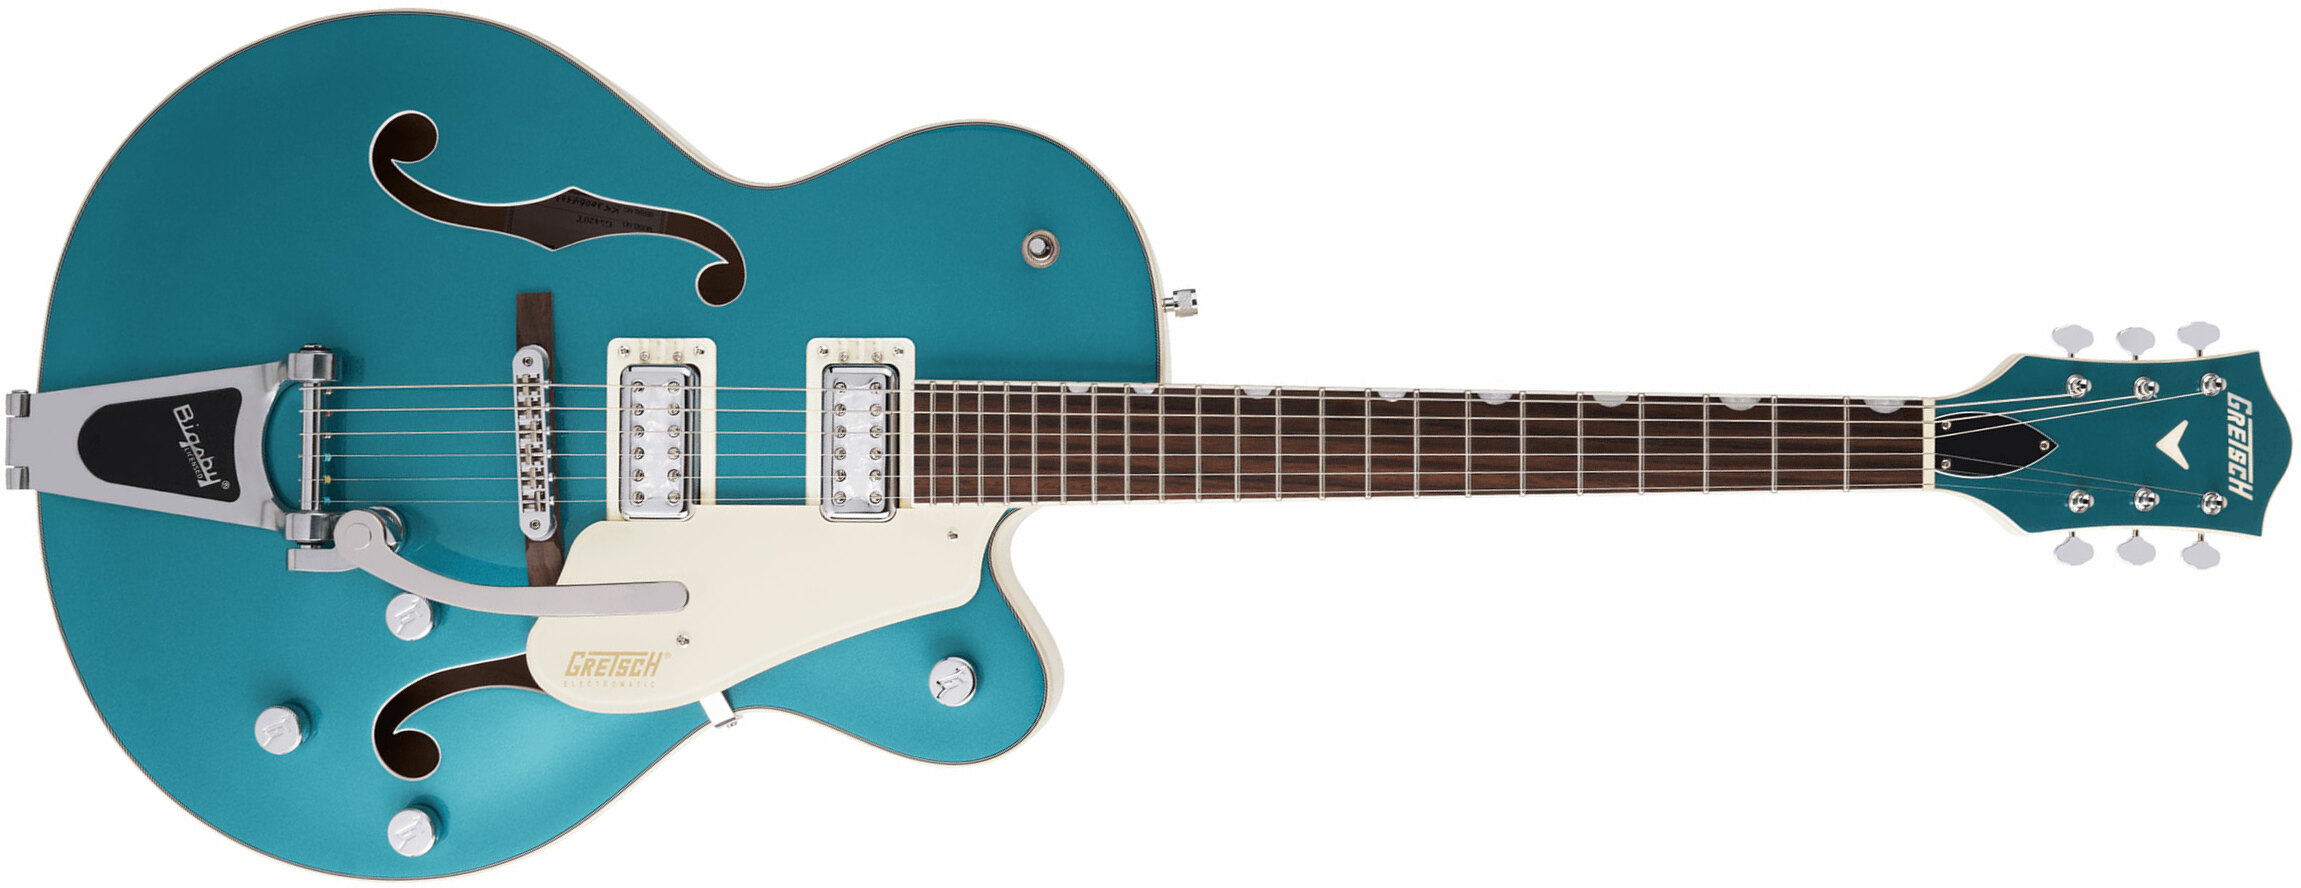 Gretsch G5410t Tri-five Electromatic Hollow Hh Bigsby Rw - Two-tone Ocean Turquoise/vintage White - Semi-Hollow E-Gitarre - Main picture